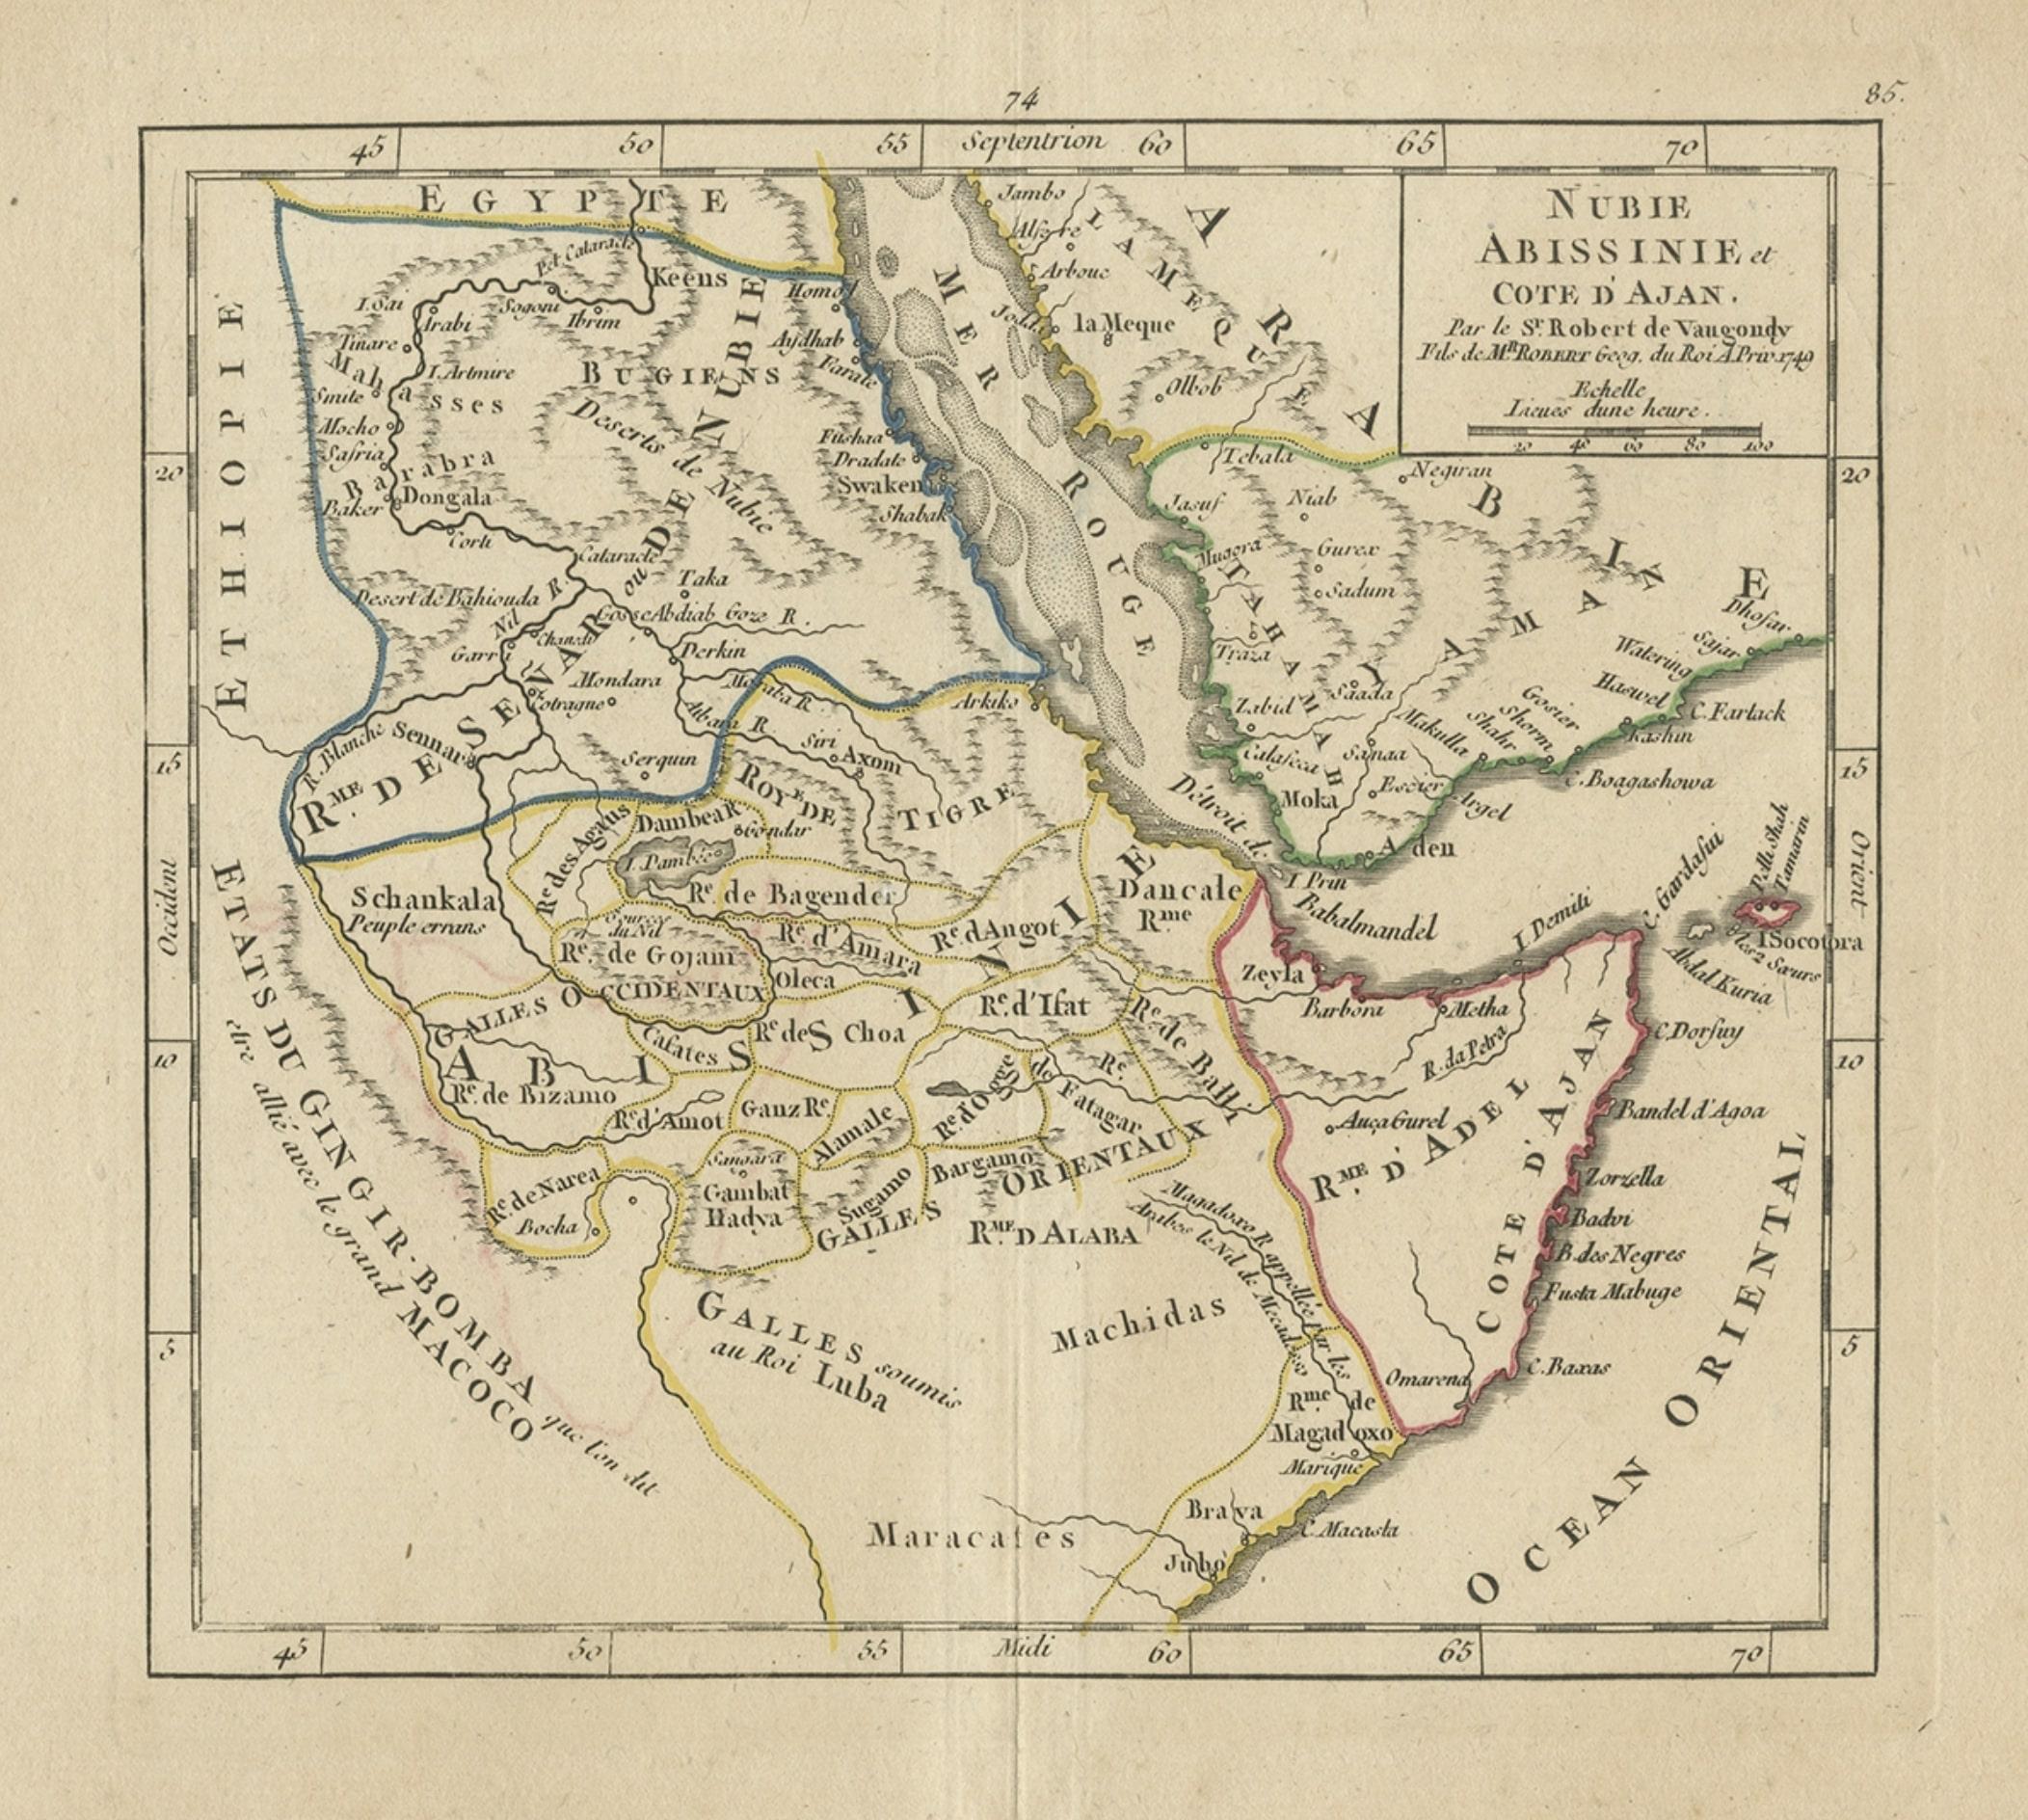 Antique map titled 'Nubie, Abissinie et Cote d'Ajan'. 

Map of Abyssinia, Sudan and the Red Sea by Robert Vaugondy. Covers from Arabia and Egypt south to Mogadishu and includes parts of modern day Sudan, Ethiopia, Somalia, Yemen, and Saudi Arabia.